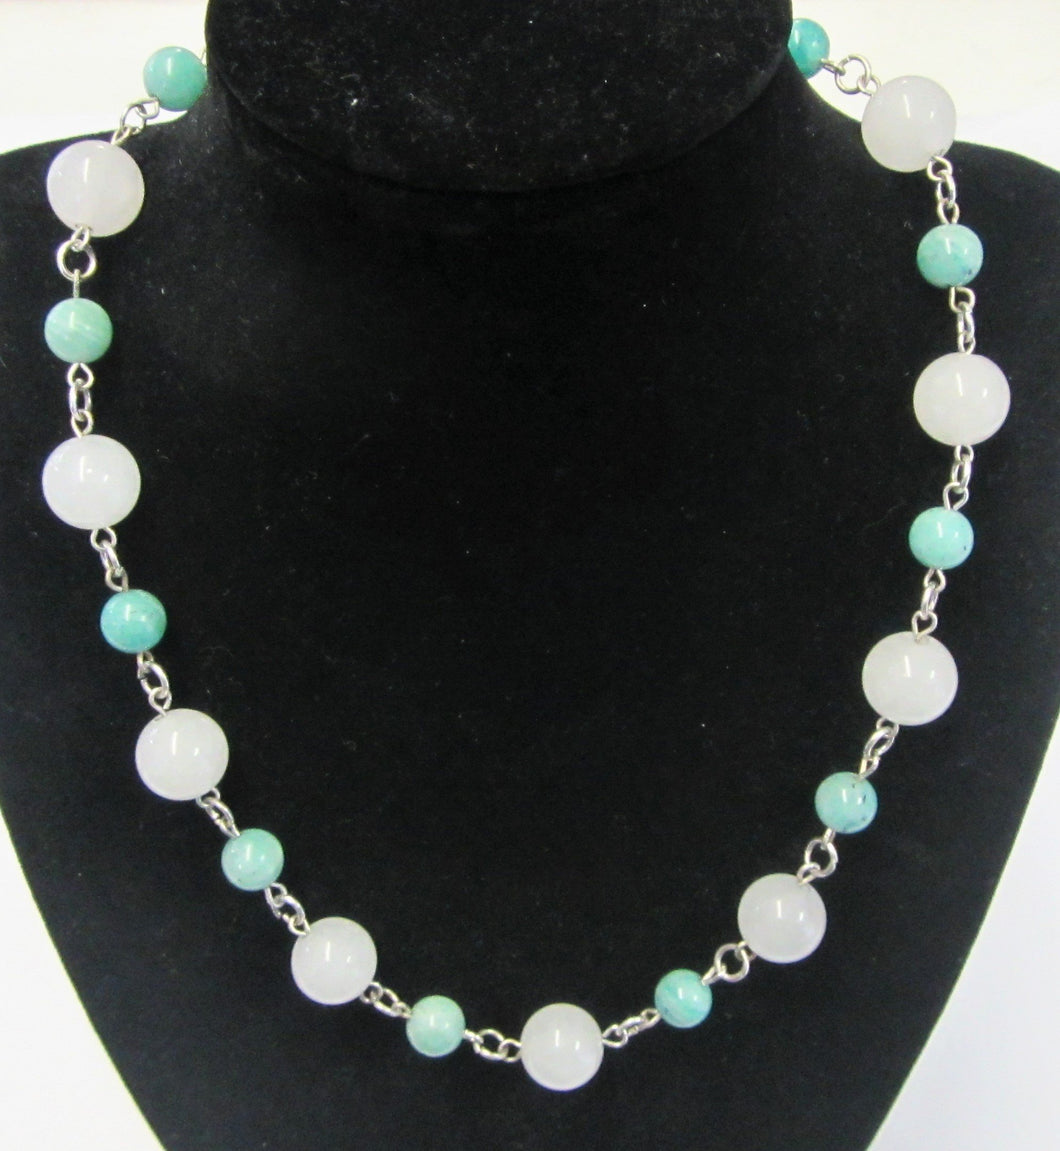 Beautiful handcrafted amazonite and quartz necklace with magnectic clasp